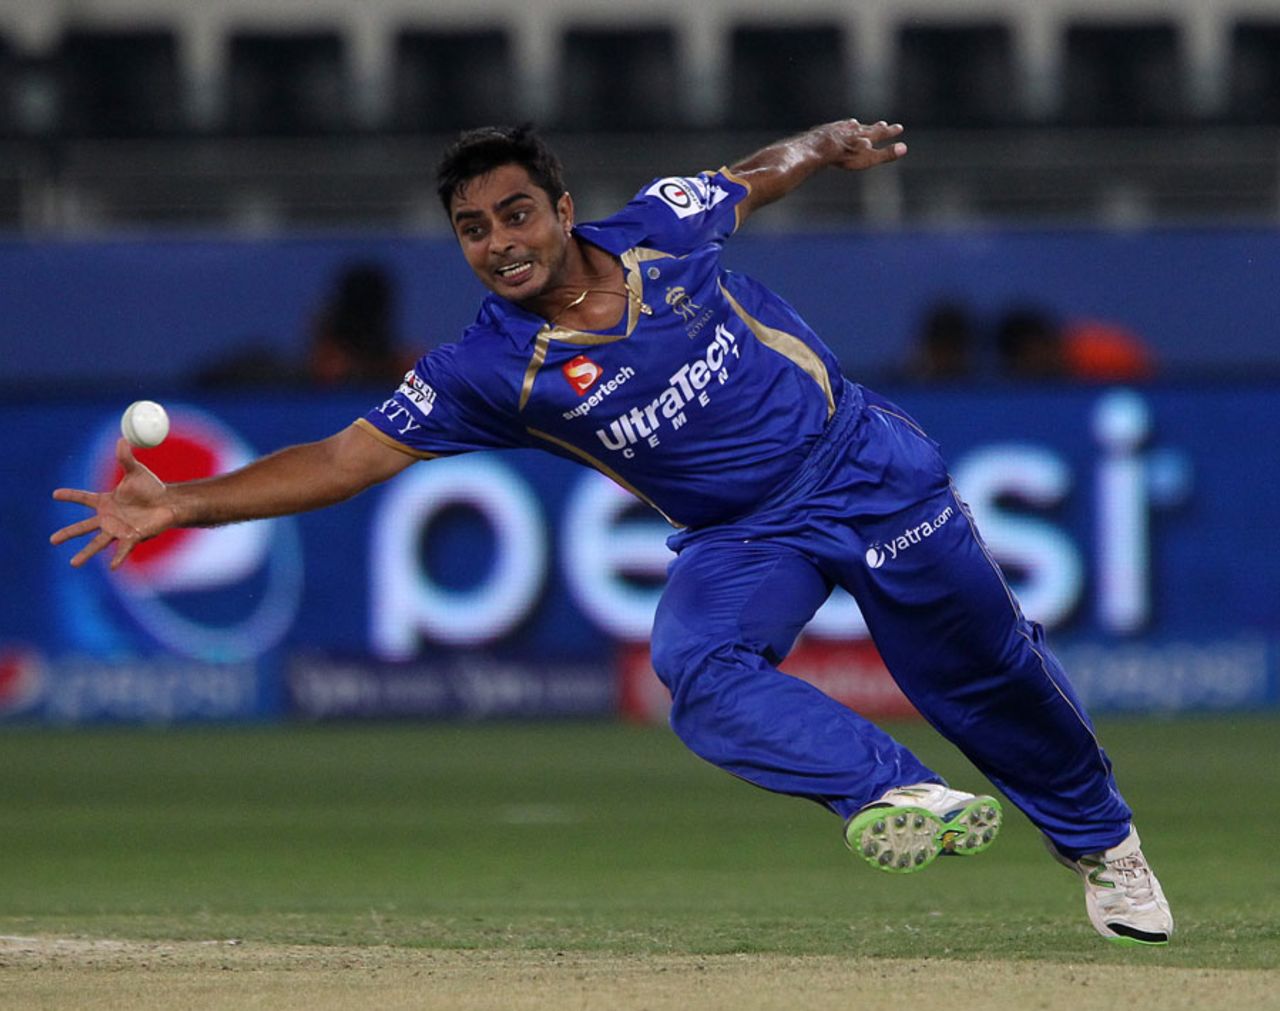 Rajat Bhatia finished with 2 for 13 in his four overs, Chennai Super Kings v Rajasthan Royals, IPL 2014, Dubai, April 23, 2014